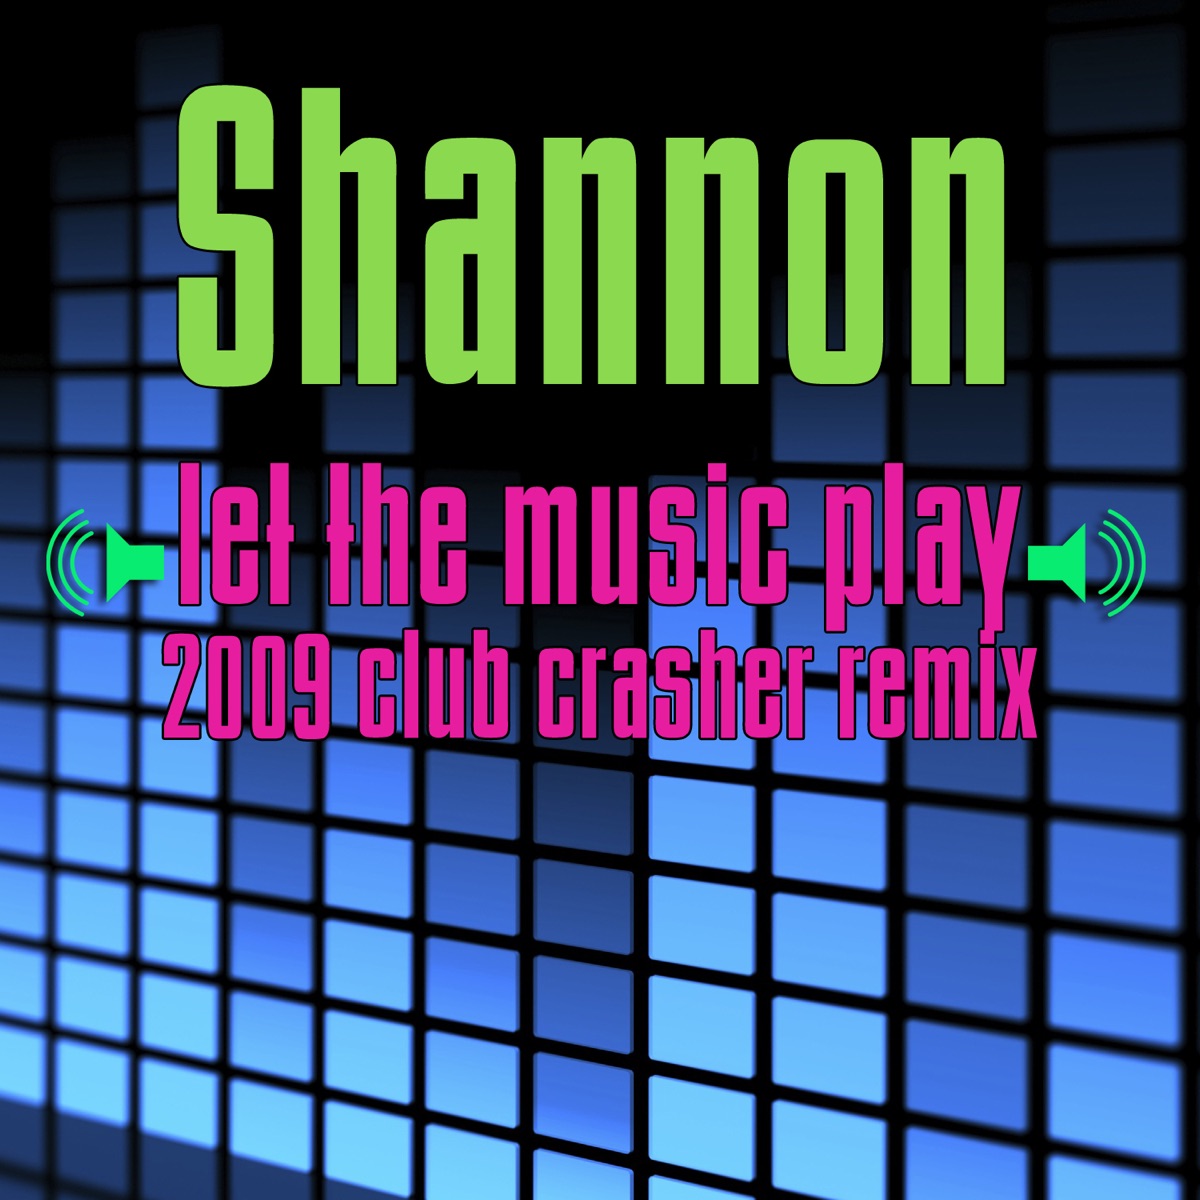 Let the Music Play by Shannon on Apple Music